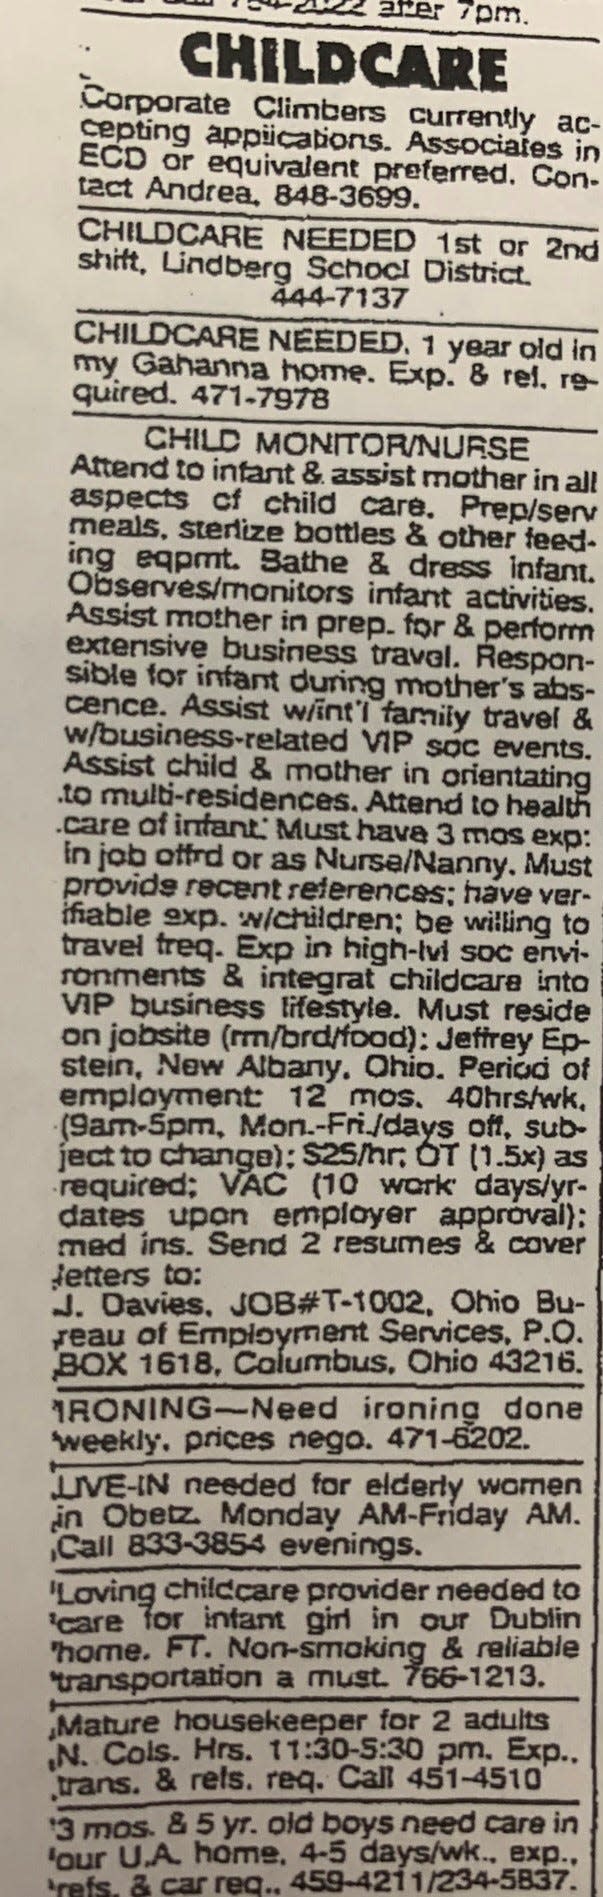 Disgraced financier Jeffrey Epstein placed this ad in The Dispatch in 1995 when Wexner and his wife, Abigail, needed a nanny at their New Albany estate.